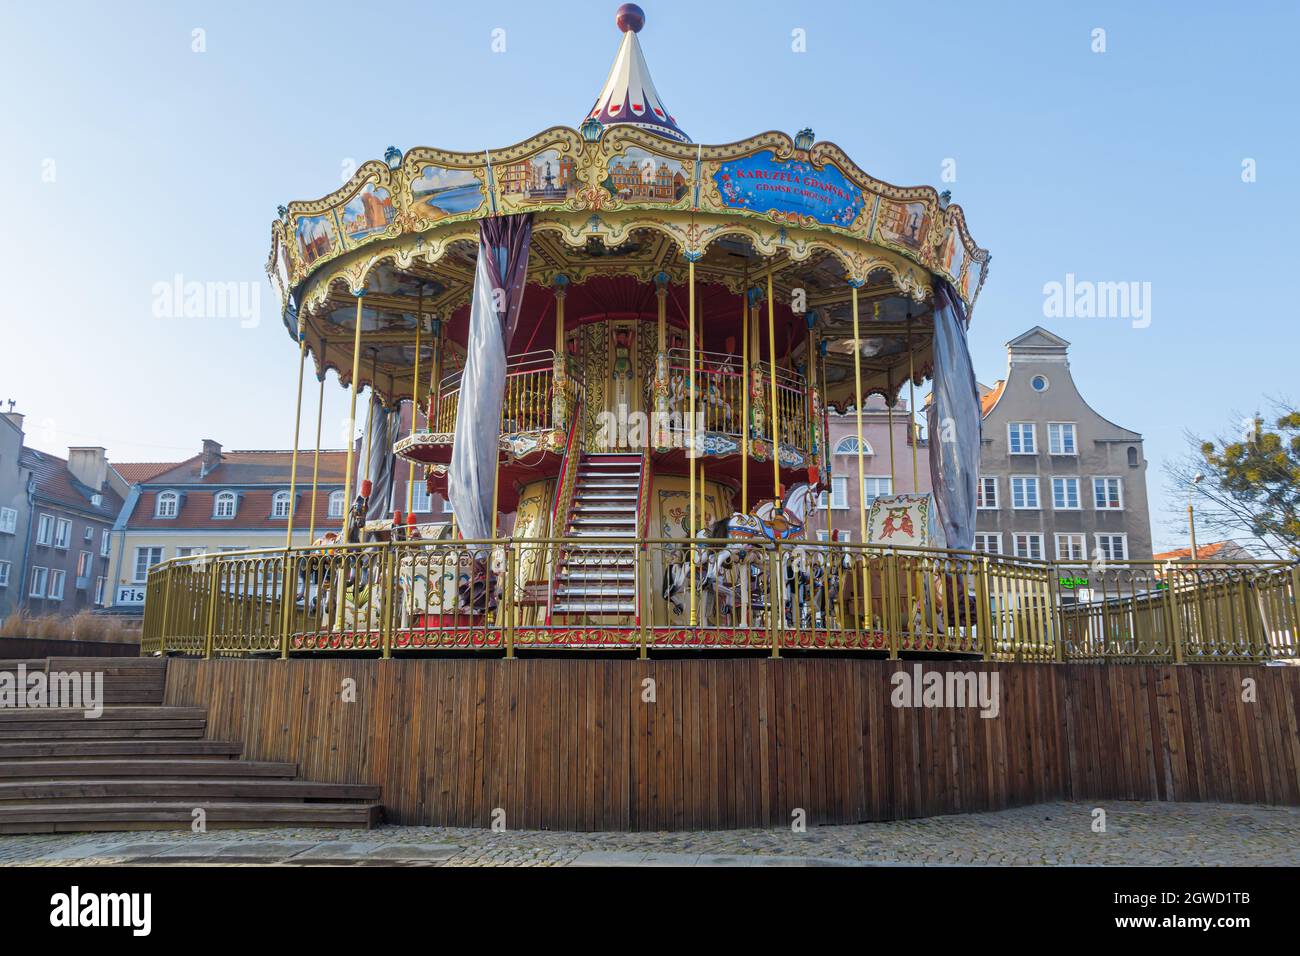 GDANSK, POLAND - 2020 JANUARY 17. Carousel at the old town of Gdansk. Stock Photo